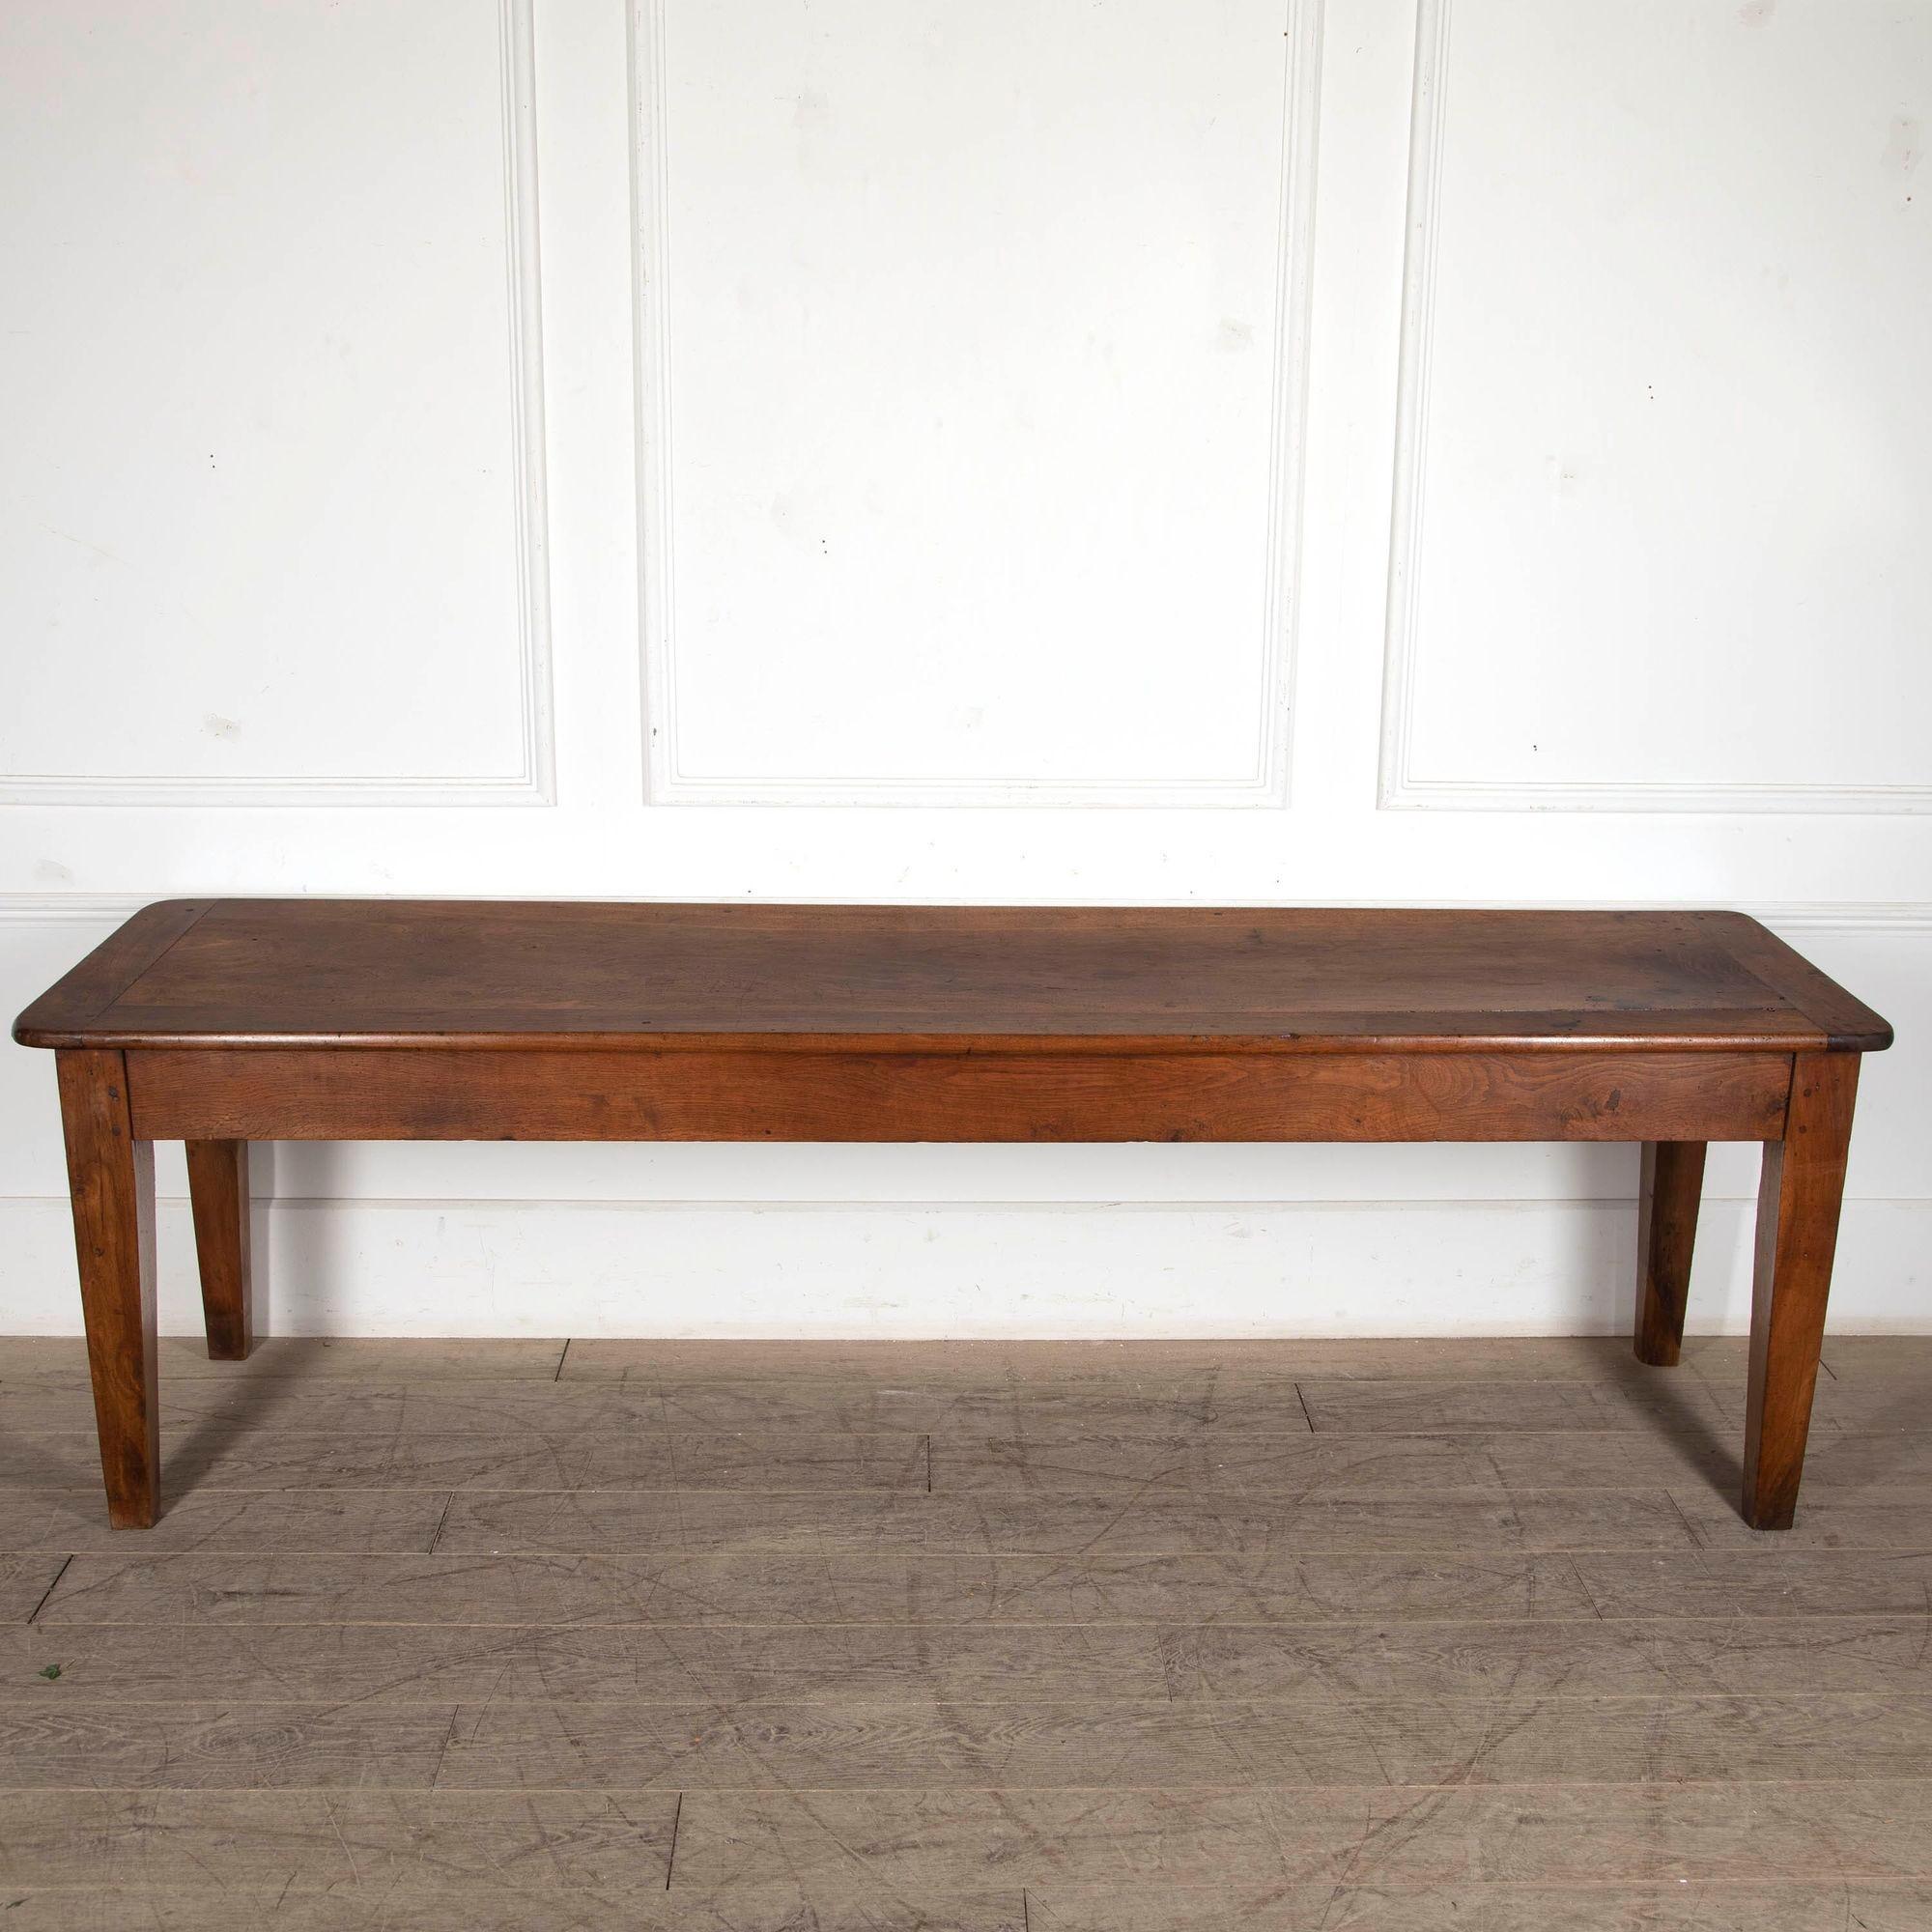 French 19th century fruitwood refectory table of good proportions with a cutlery drawer at one end.
Larger than average, but not too deep. This table also lends itself to being an impressive console table.
circa 1880.